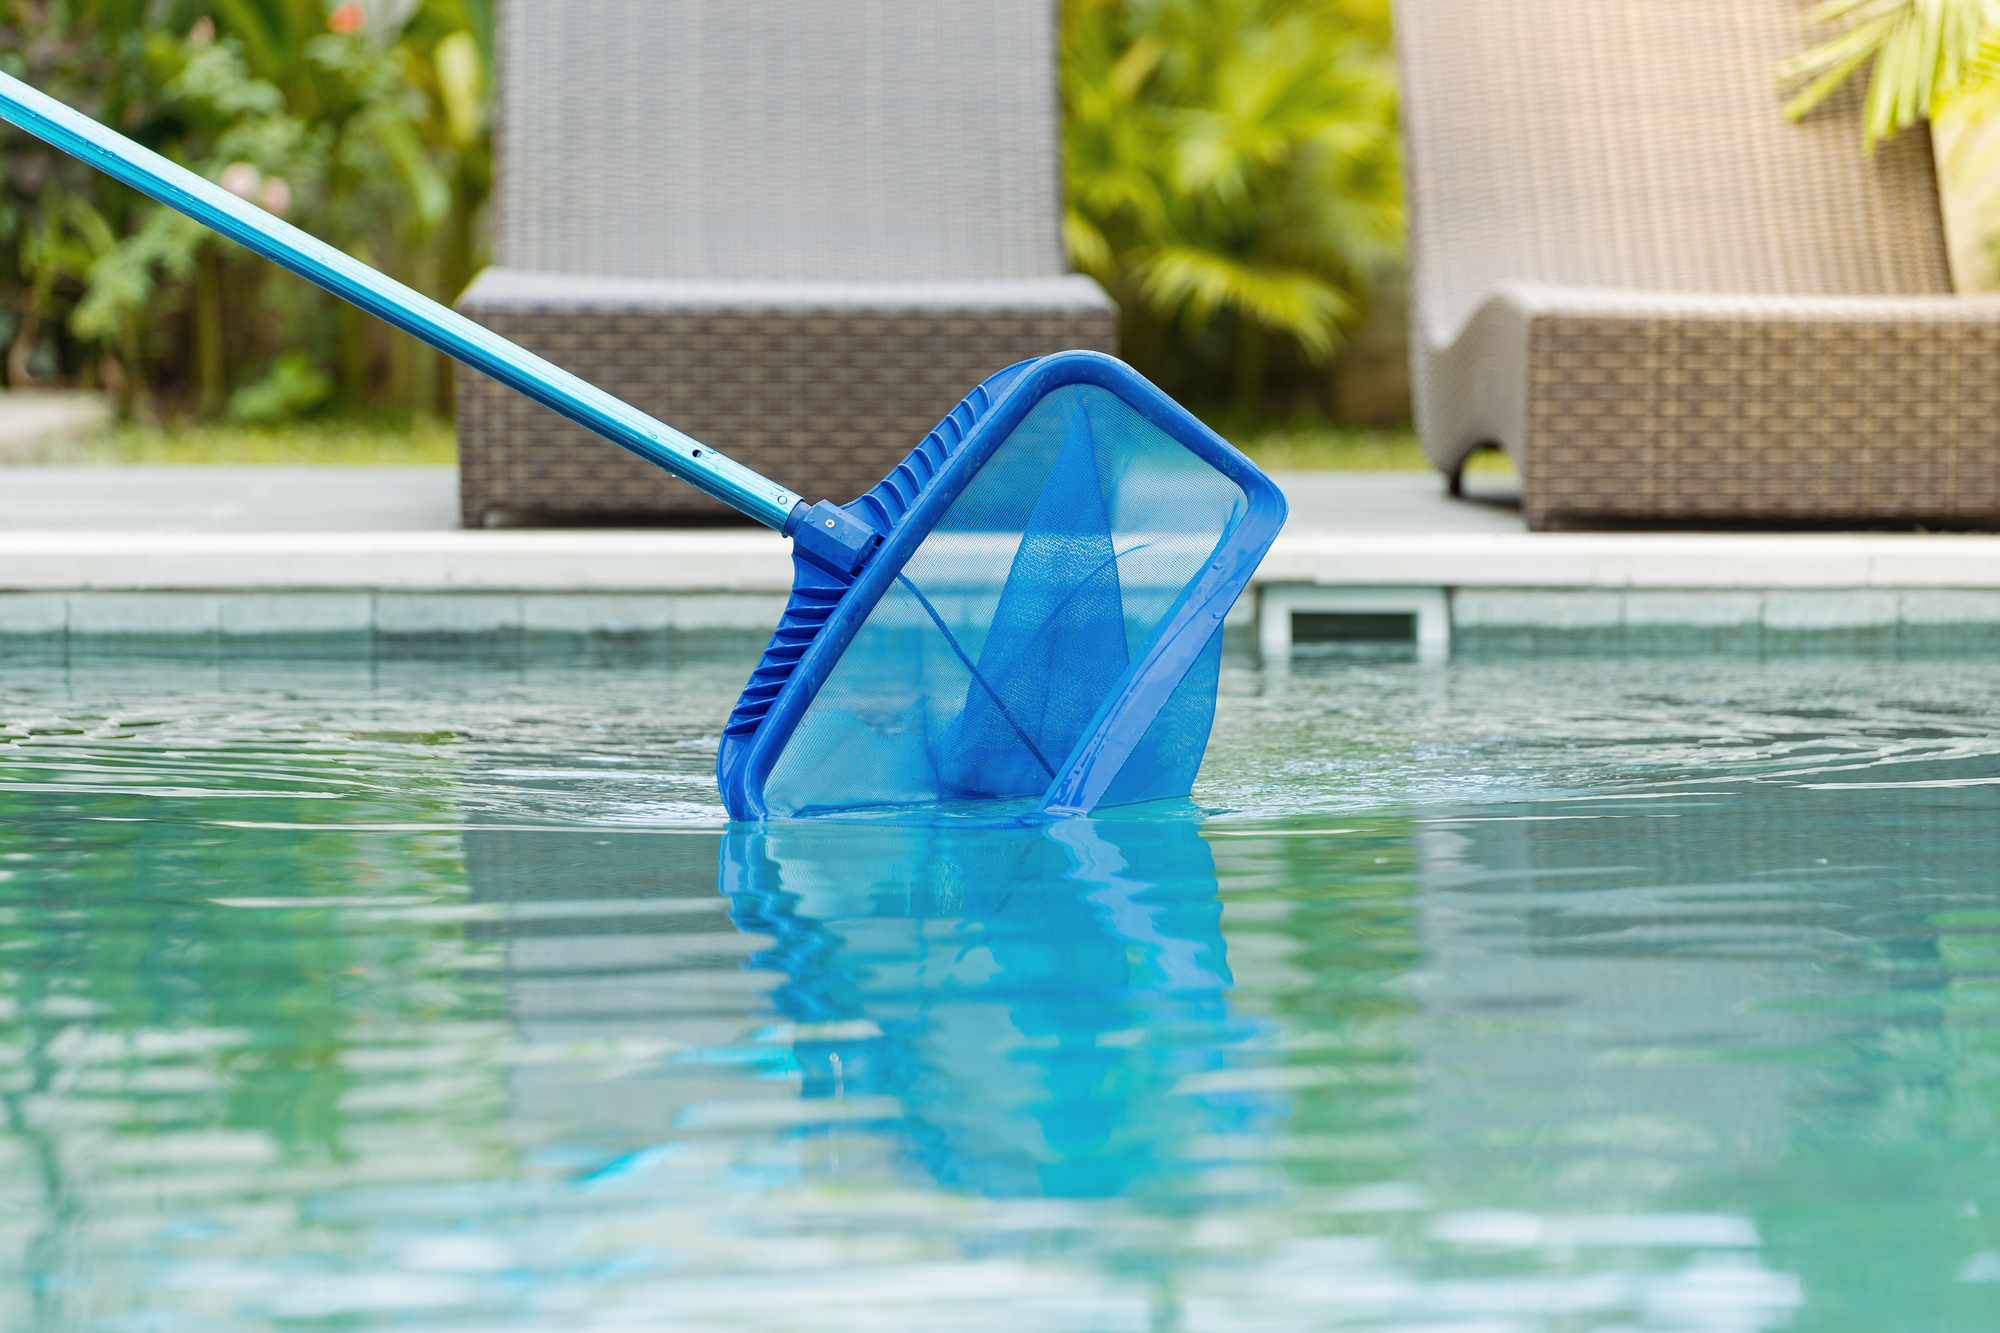 A pool cleaning net at the end of a blue pole skimming the surface of a swimming pool